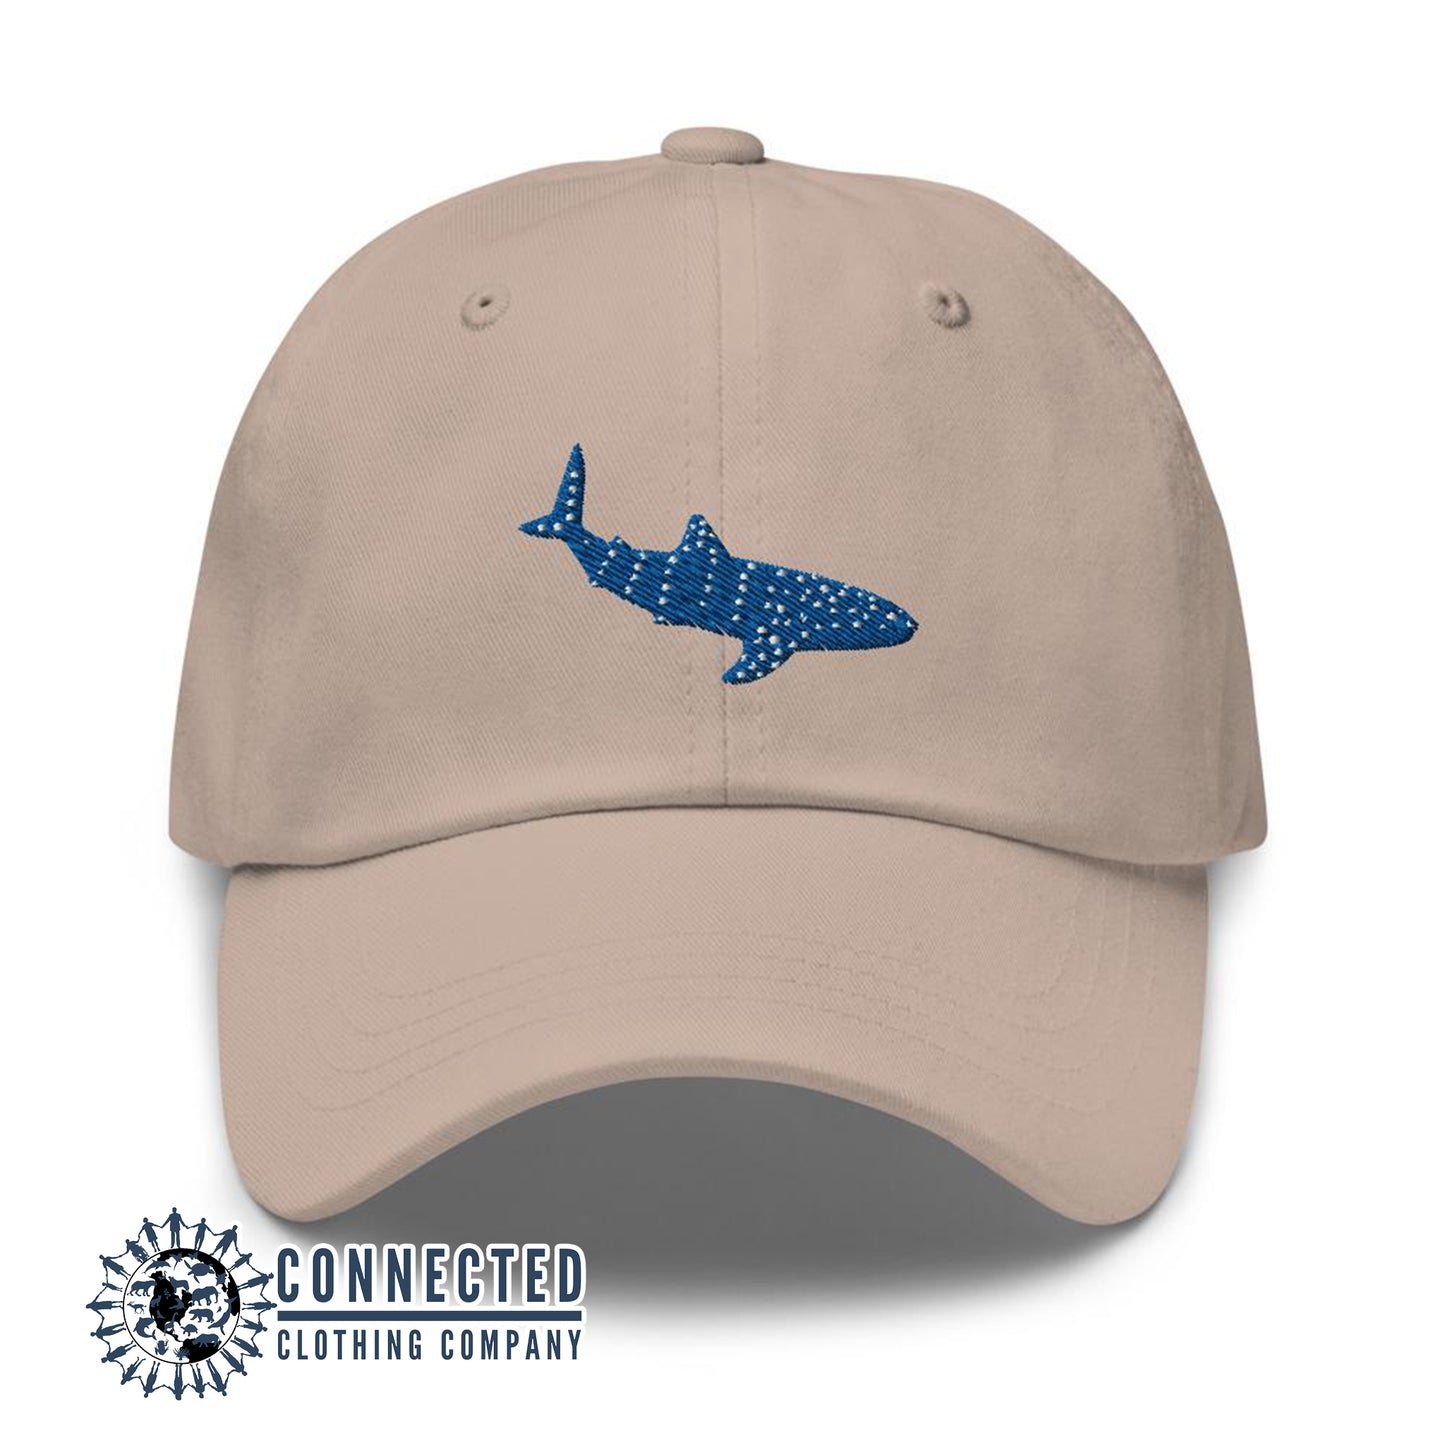 Stone Whale Shark Cotton Cap - sweetsherriloudesigns - Ethically and Sustainably Made - 10% donated to Mission Blue ocean conservation